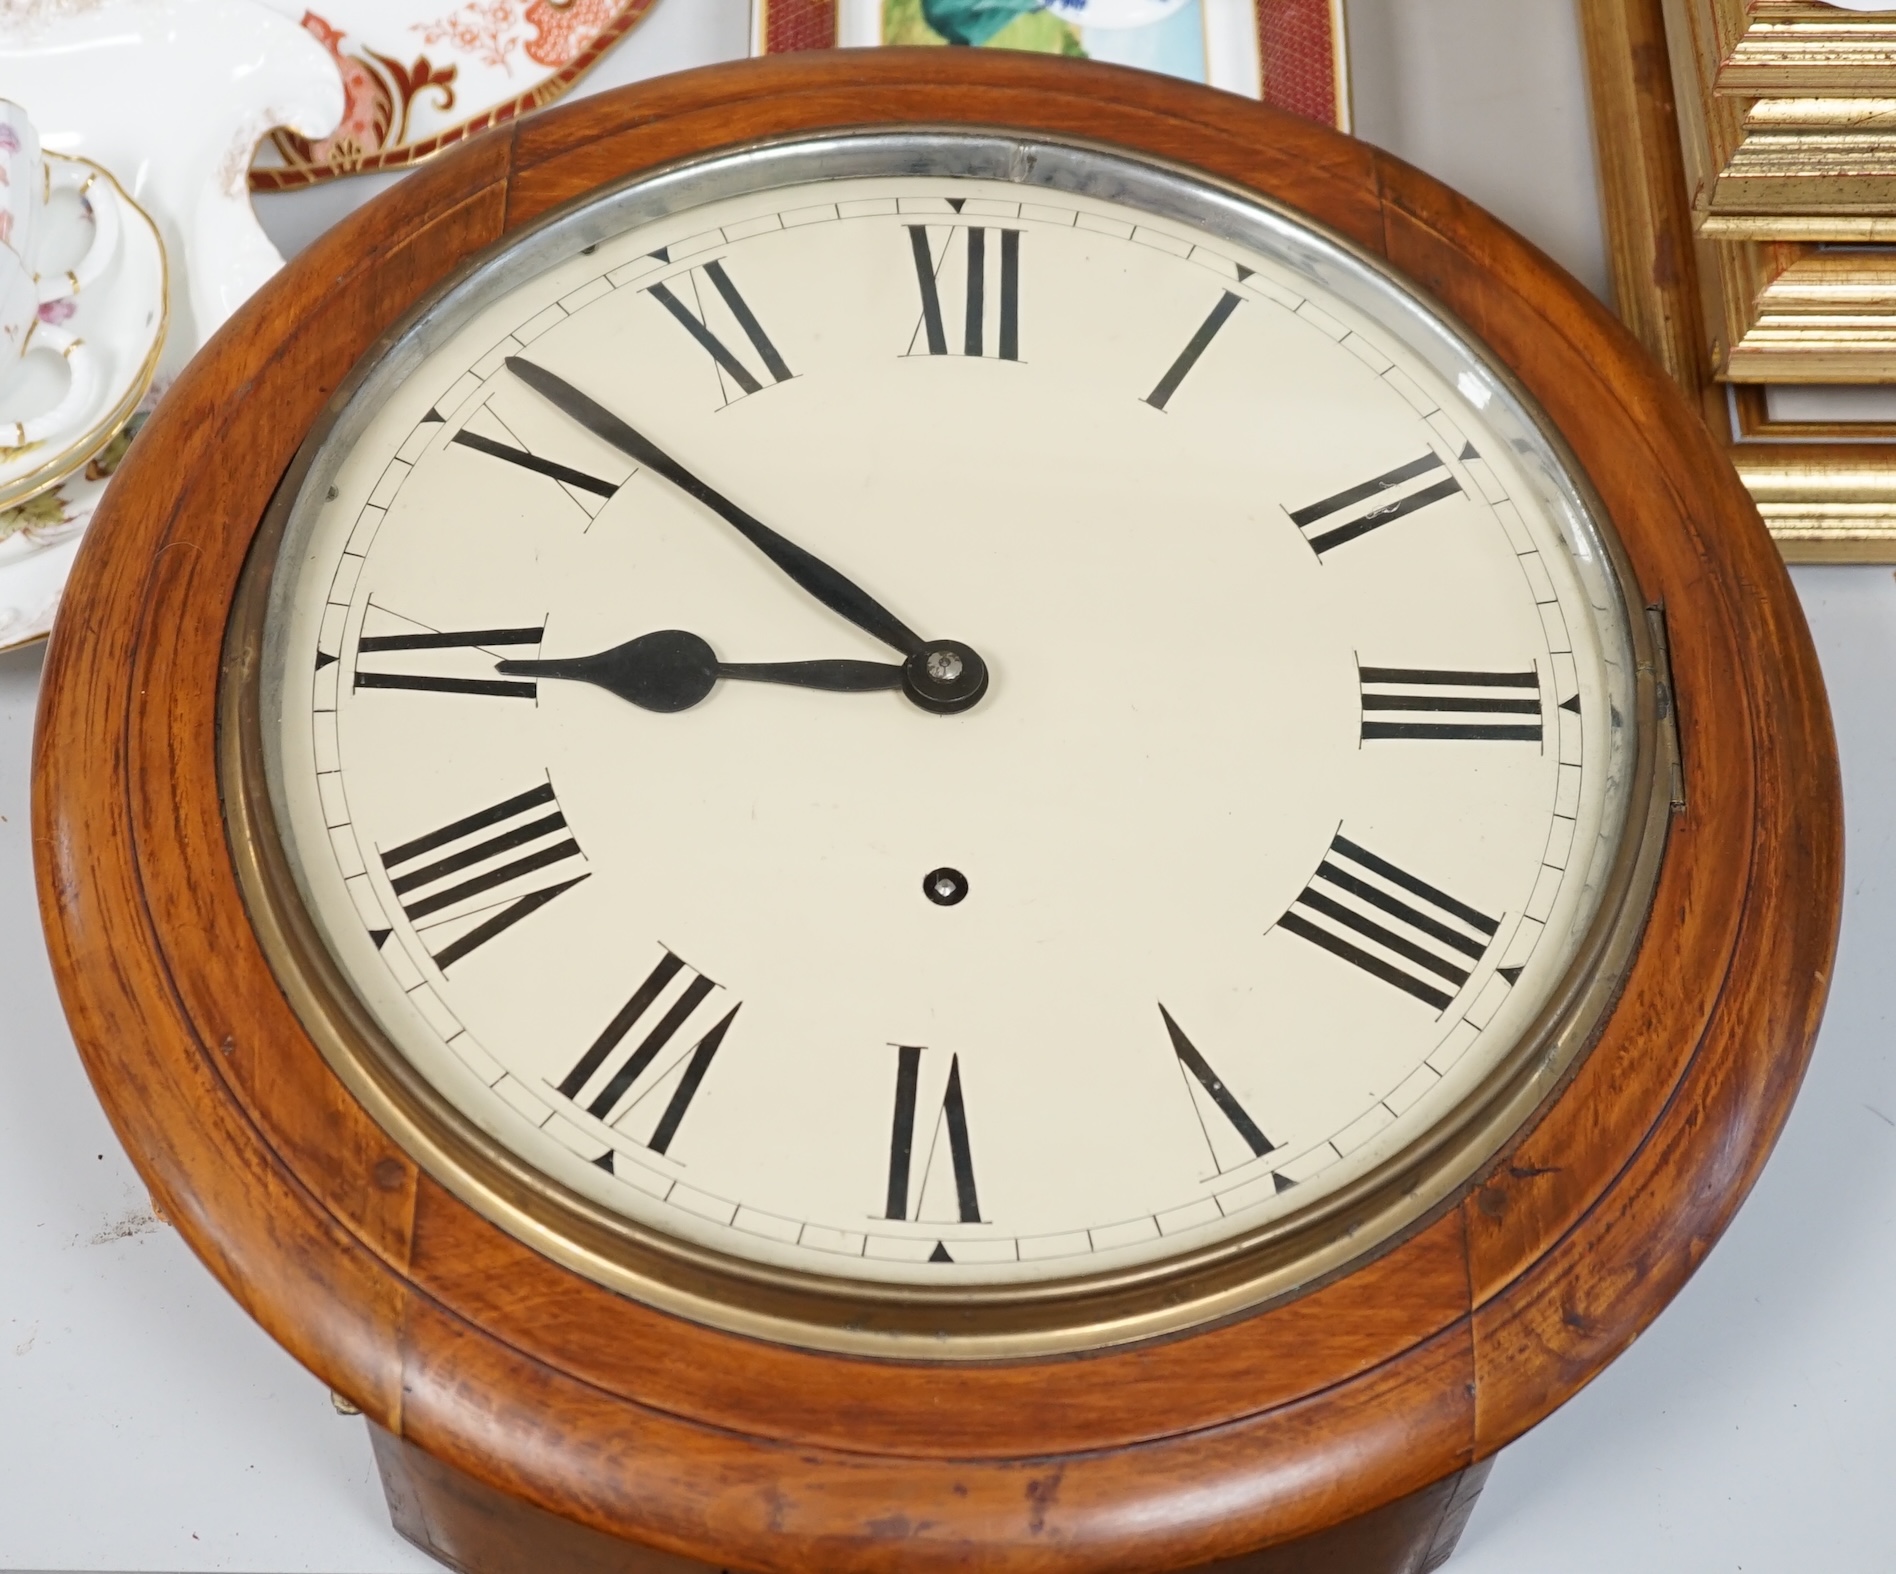 A Victorian mahogany circular dial eight day wall timepiece, with a spring driven movement and a white enamelled dial with Roman numerals, diameter 40cm